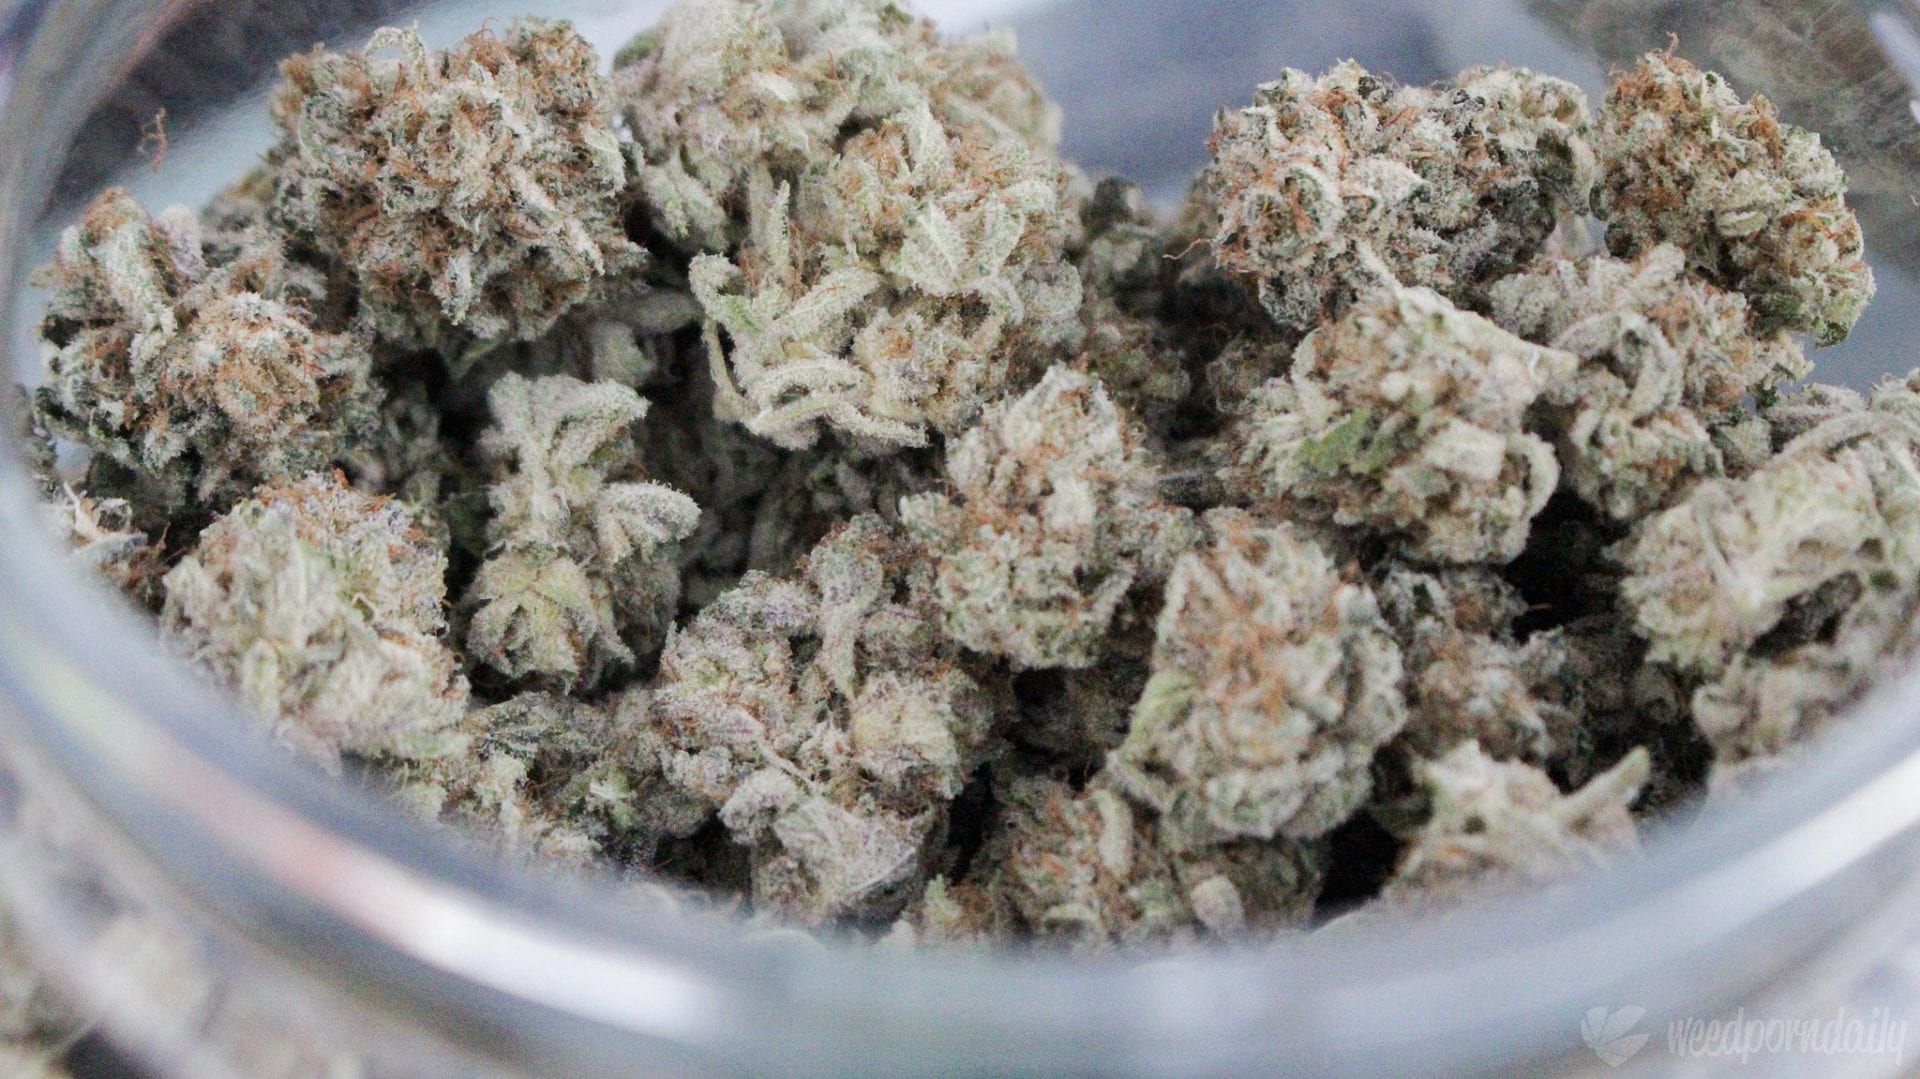 This Is The Best Way To Store Marijuana For The Apocalypse, According To Science